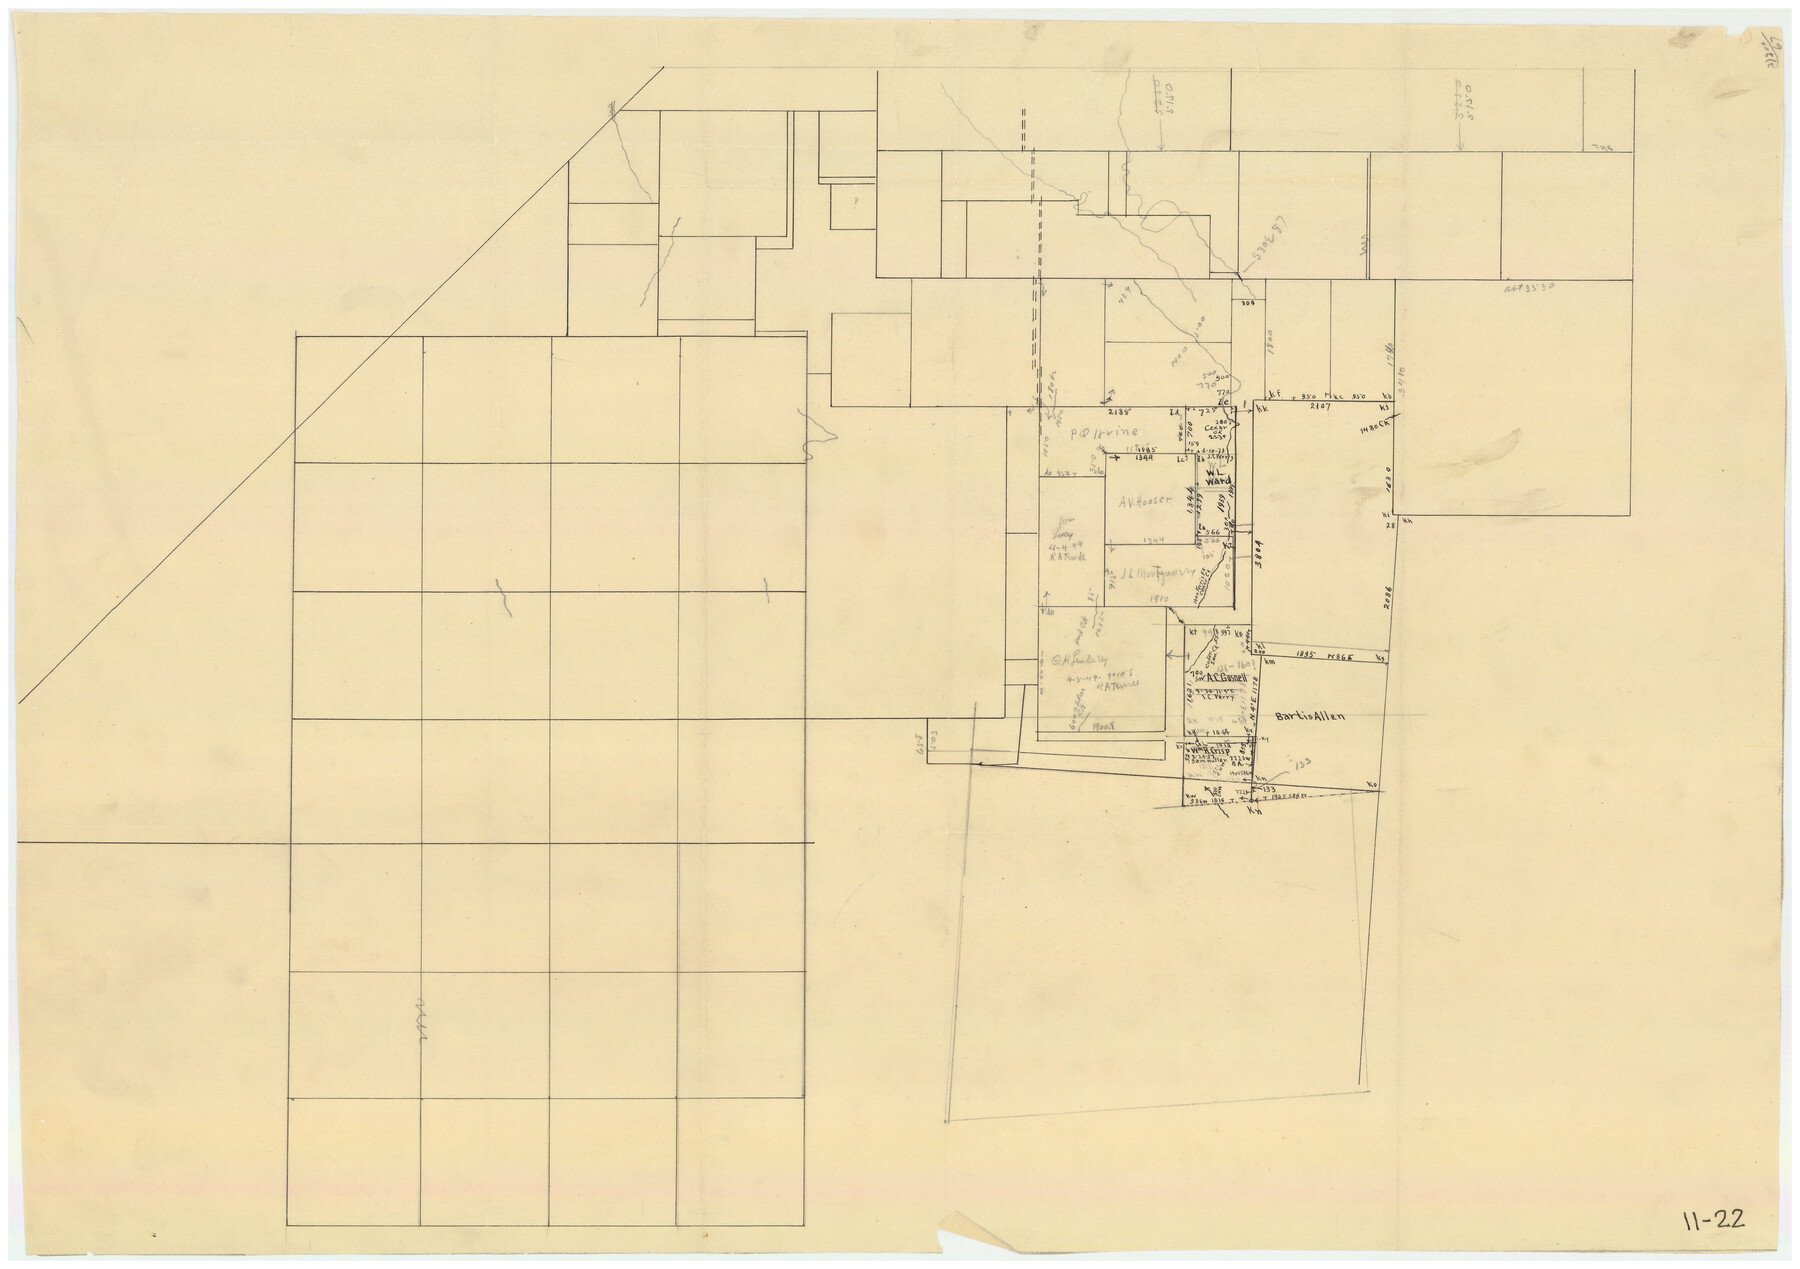 90231, [Sketch Showing Wm. T. Brewer, John R. Taylor, Wm. F. Butler, Timothy DeVore, L. M. Thorn and adjoining surveys], Twichell Survey Records